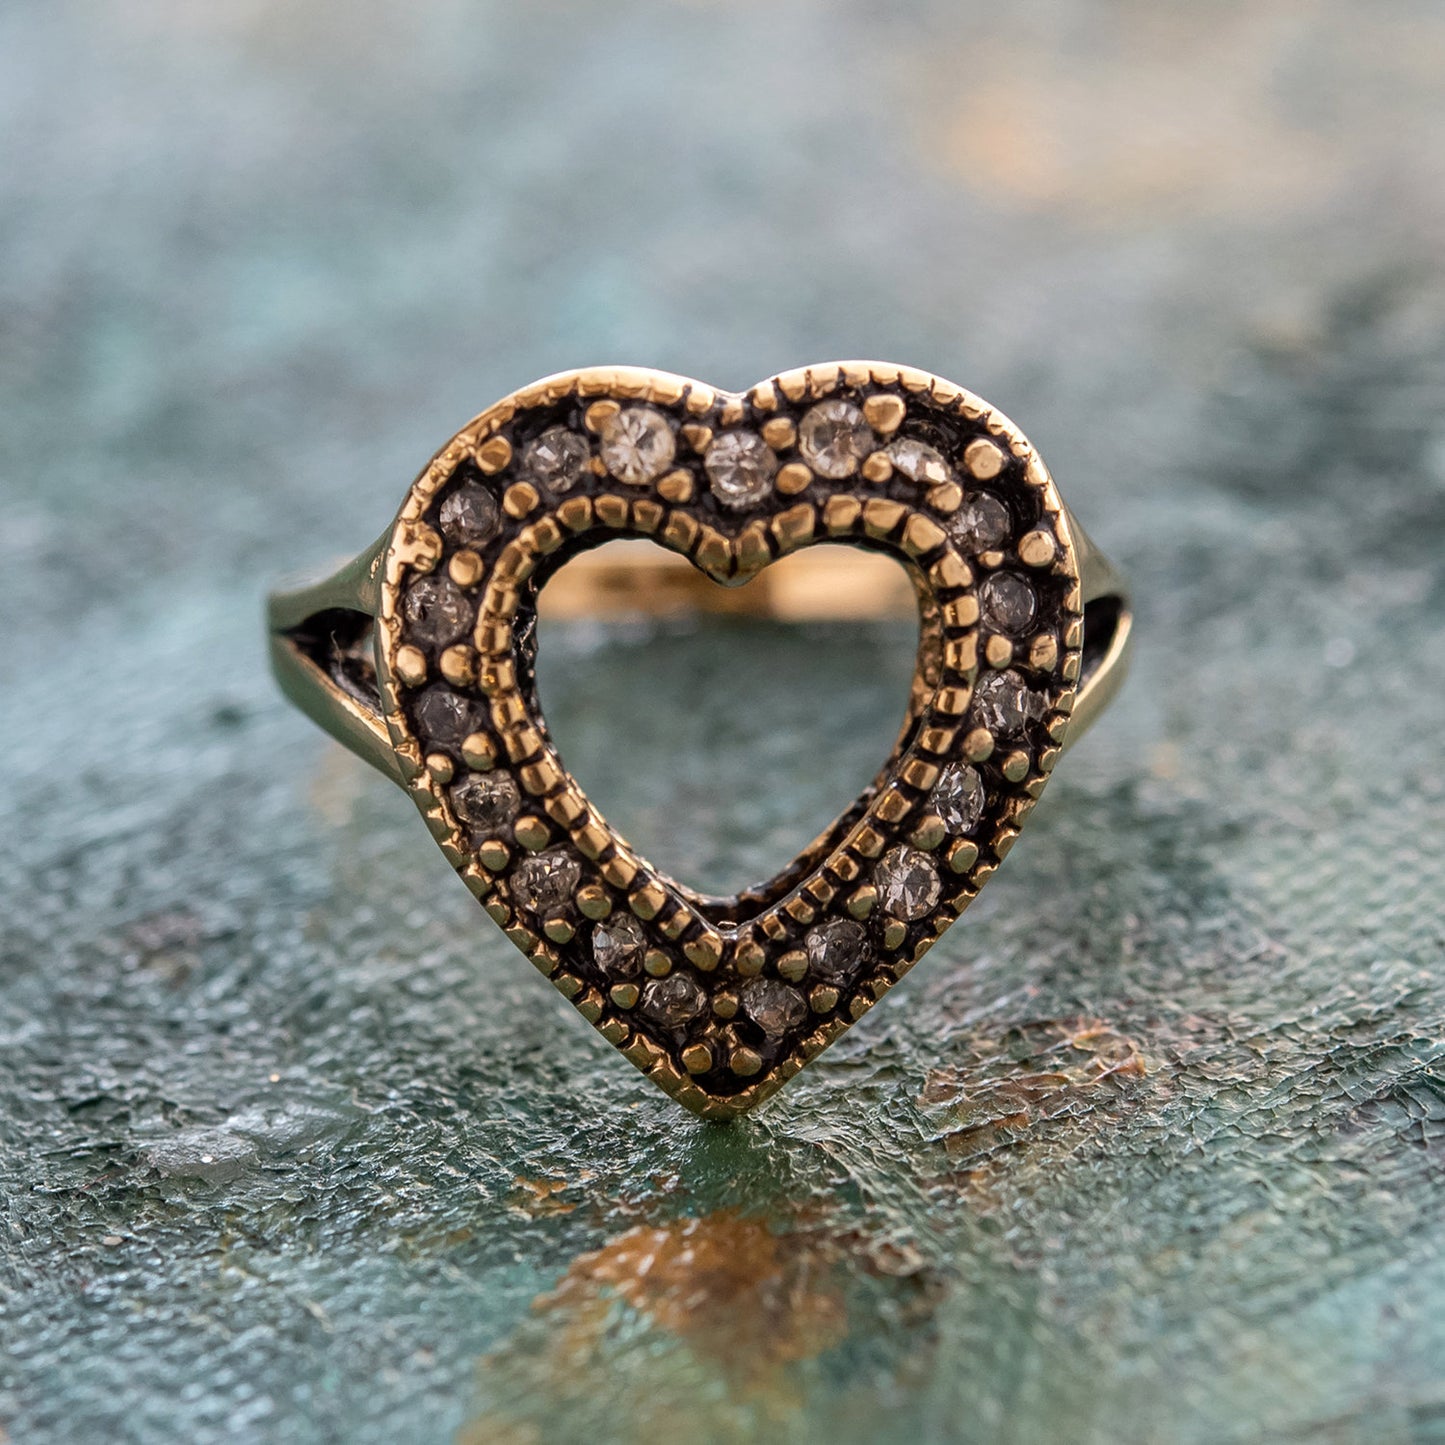 Vintage Genuine Marcasite Heart Ring Antiqued 18k White Gold Electroplated Made in USA